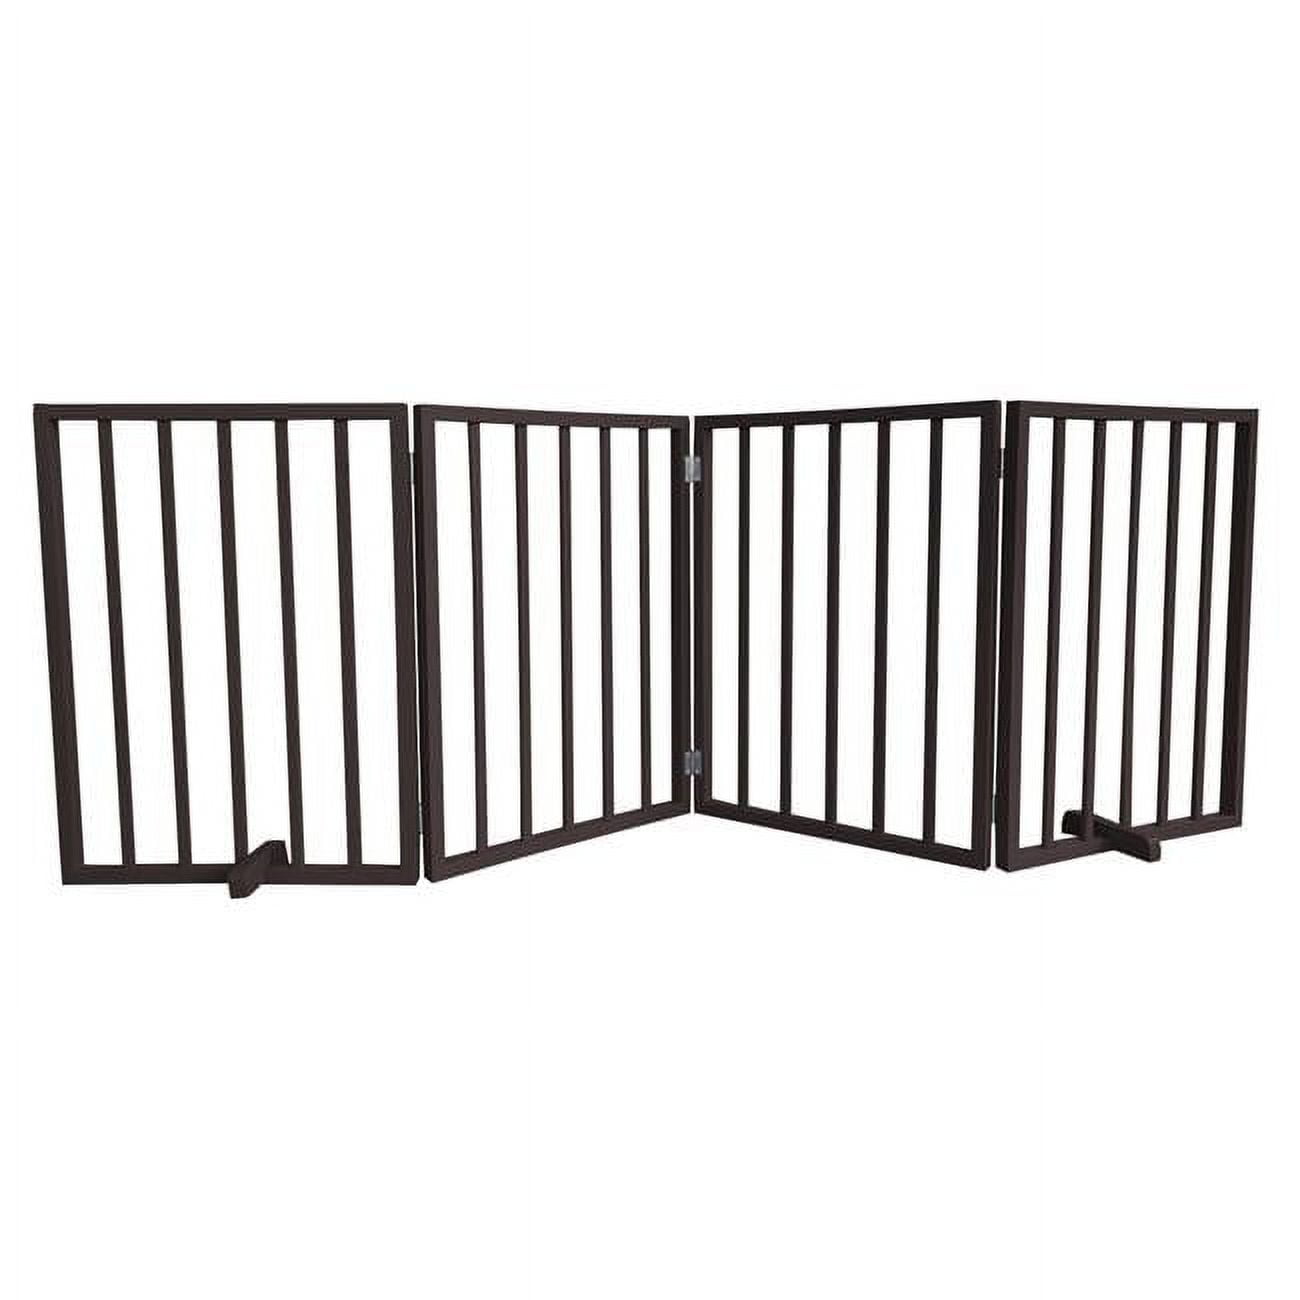 Picture of AmeriHome WFPGB4 72 in. Freestanding 4-Panel Folding Wood Pet Gate - Brown